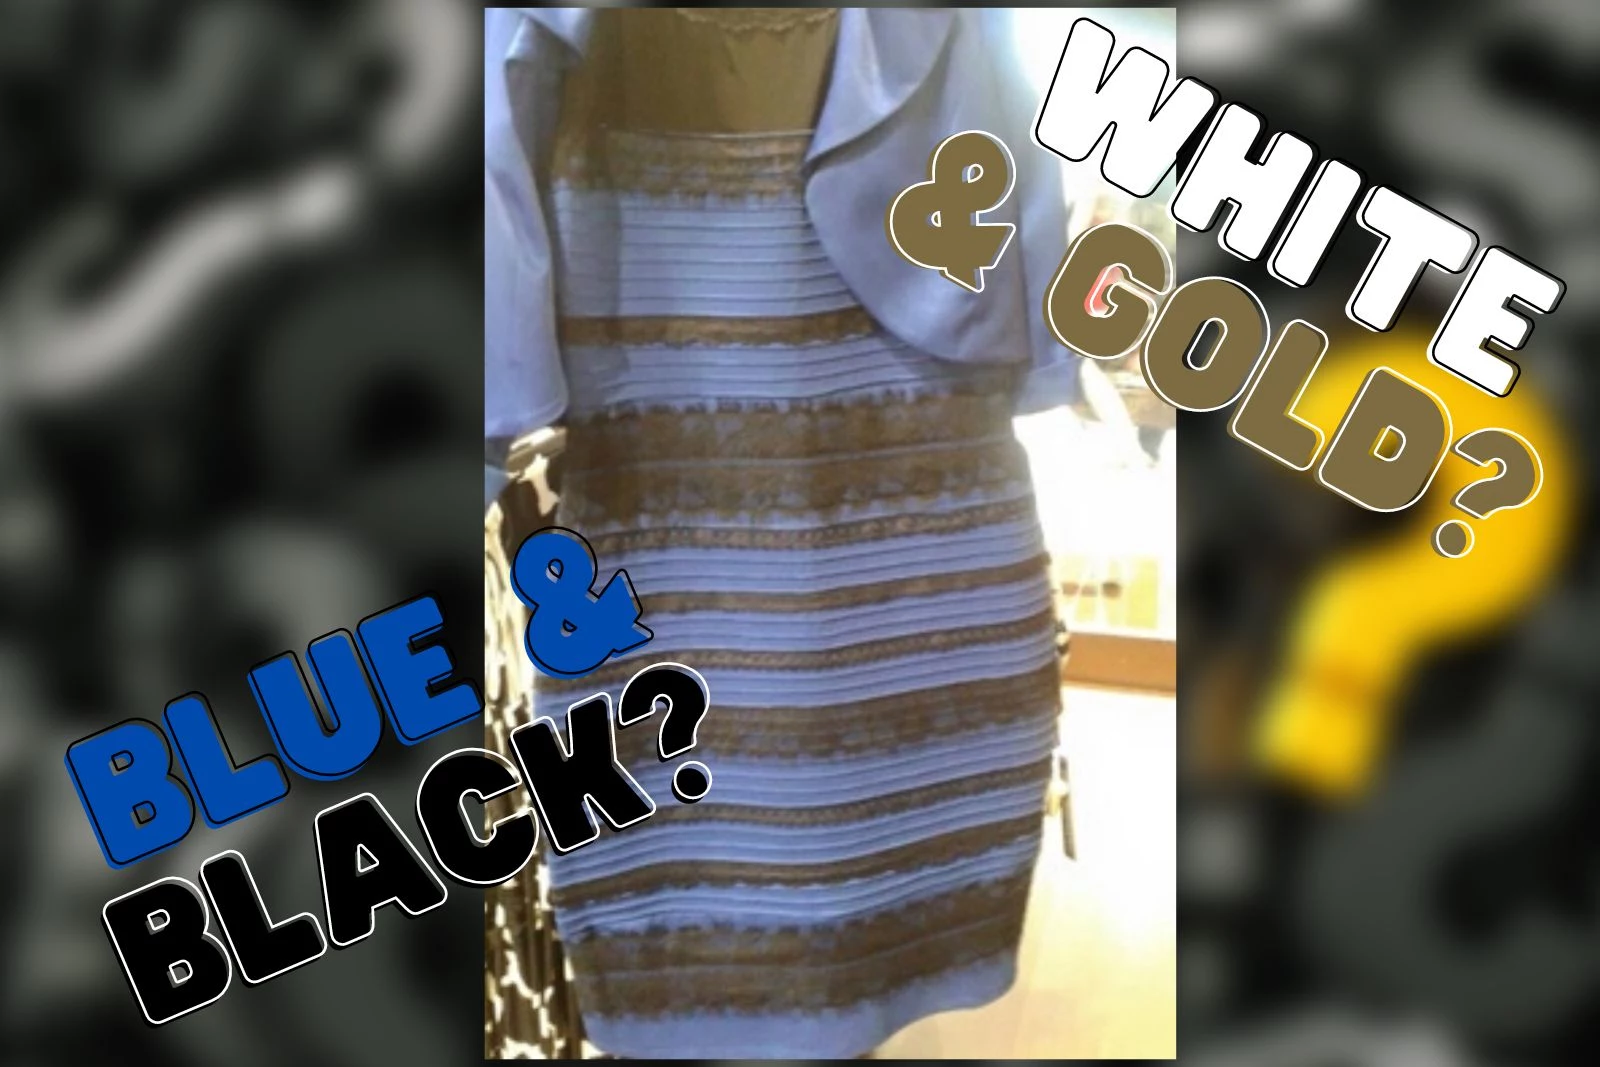 Flashback Friday: Is This Dress Gold and White or Blue and Black?